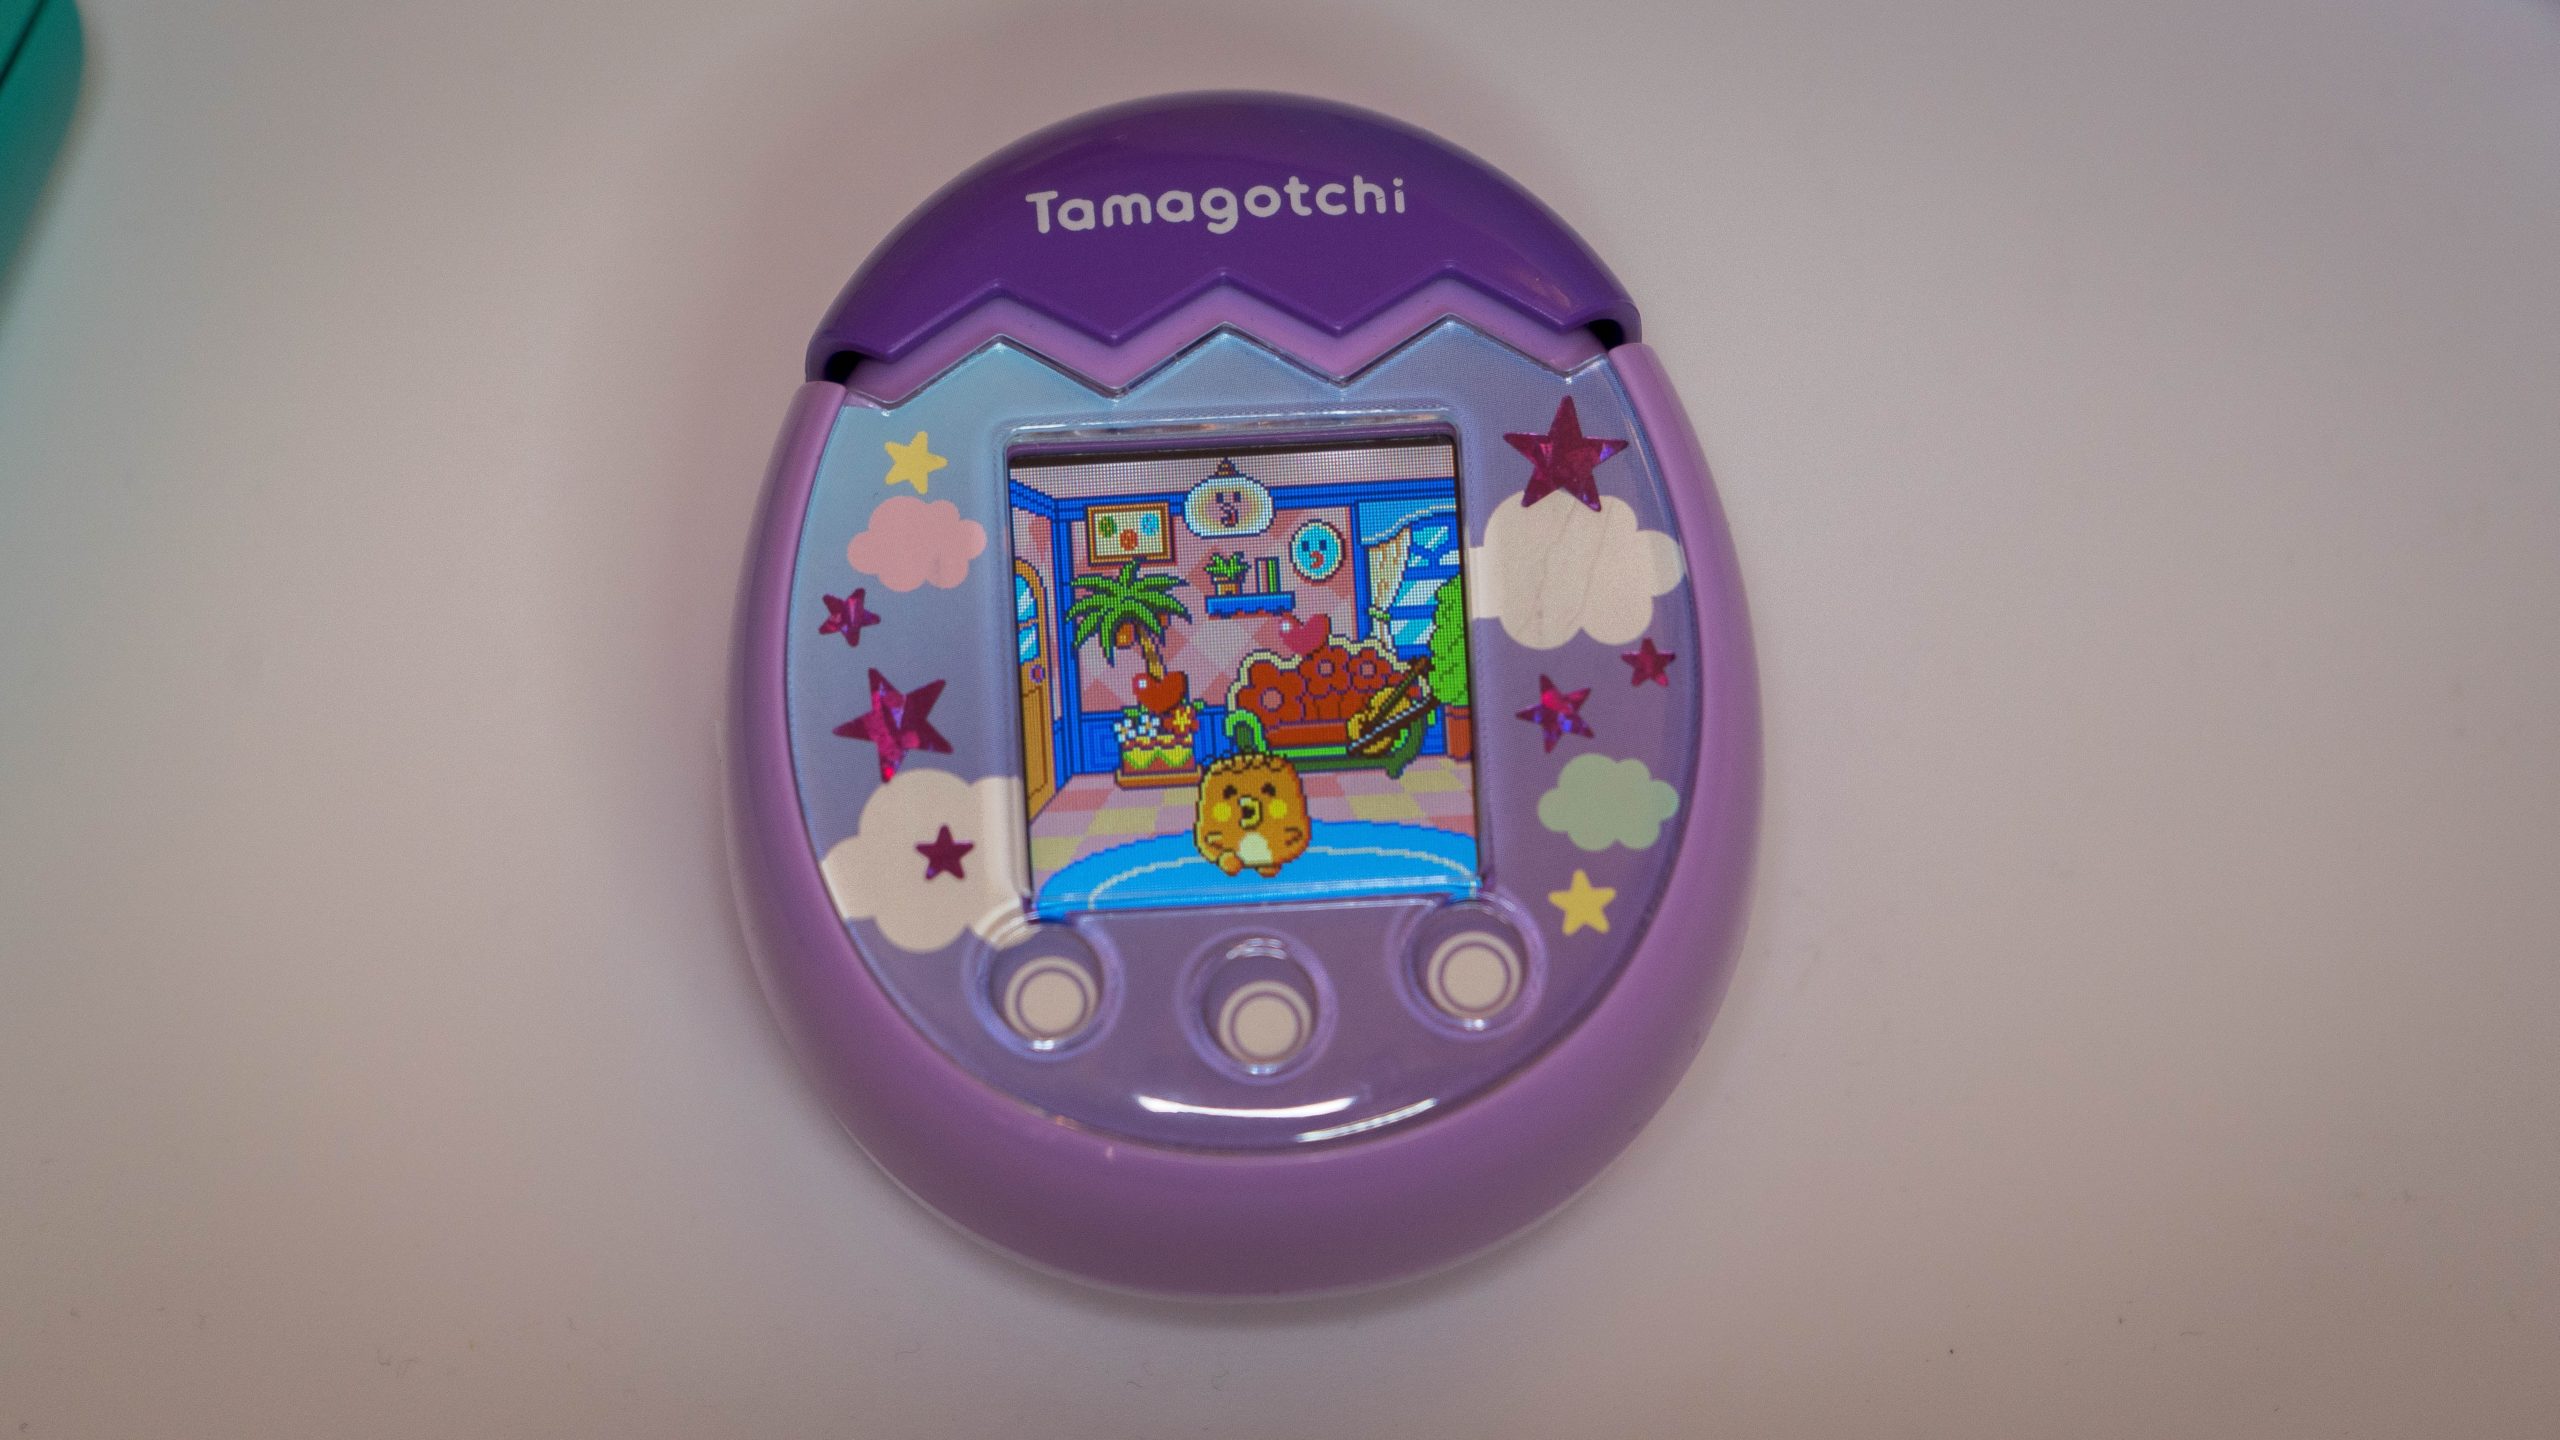 When a Tamagotchi loves something, you'll see hearts appear on the screen.  (Photo: Florence Ion / Gizmodo)